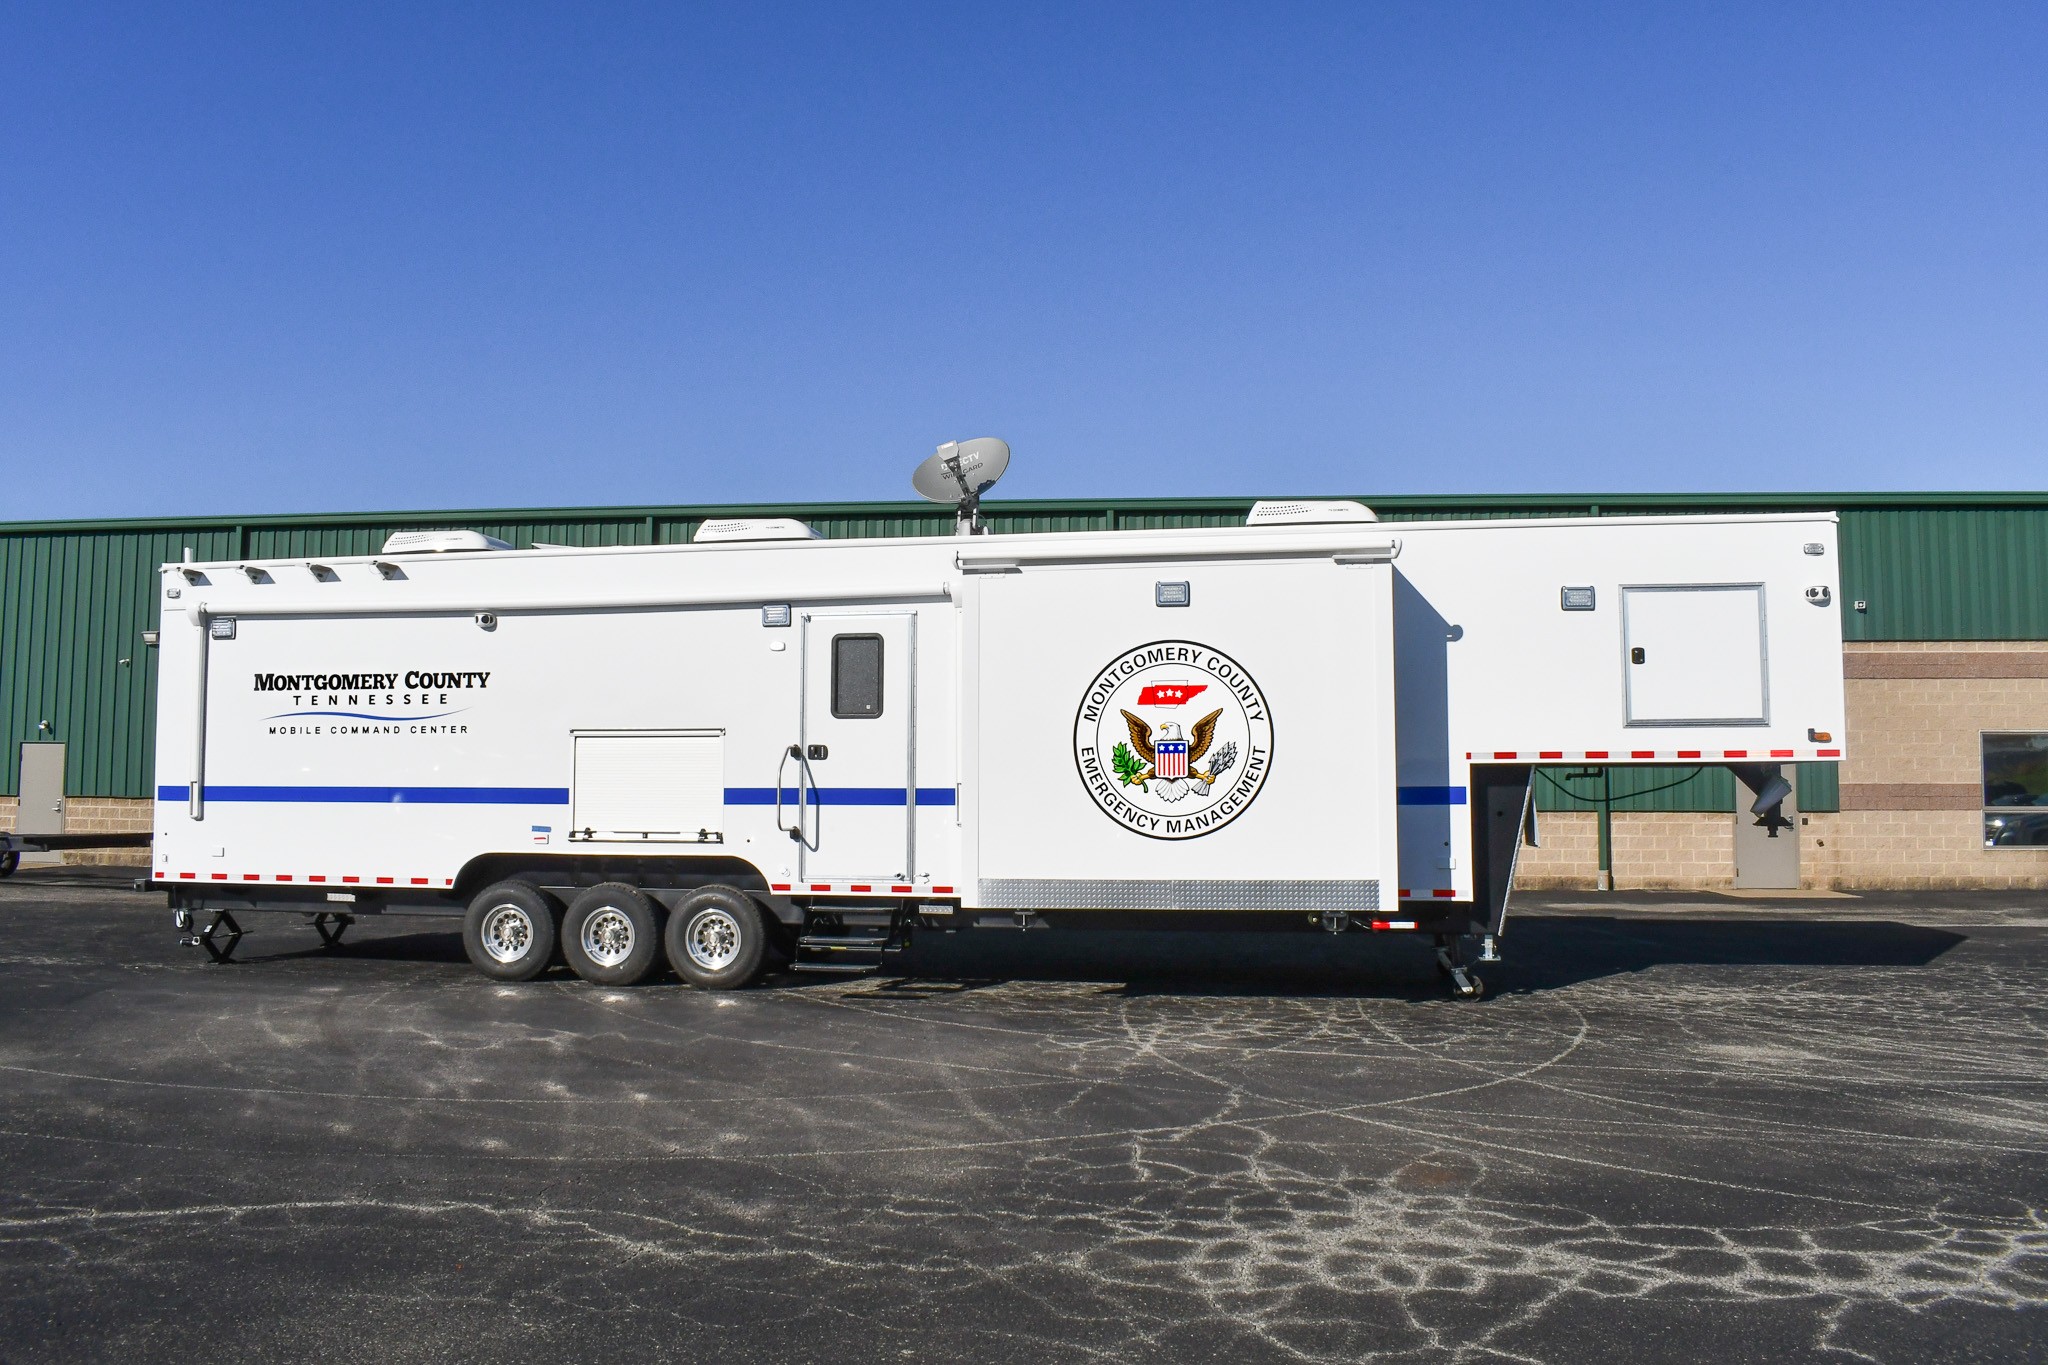 A side view of the unit for Montgomery County, TN.